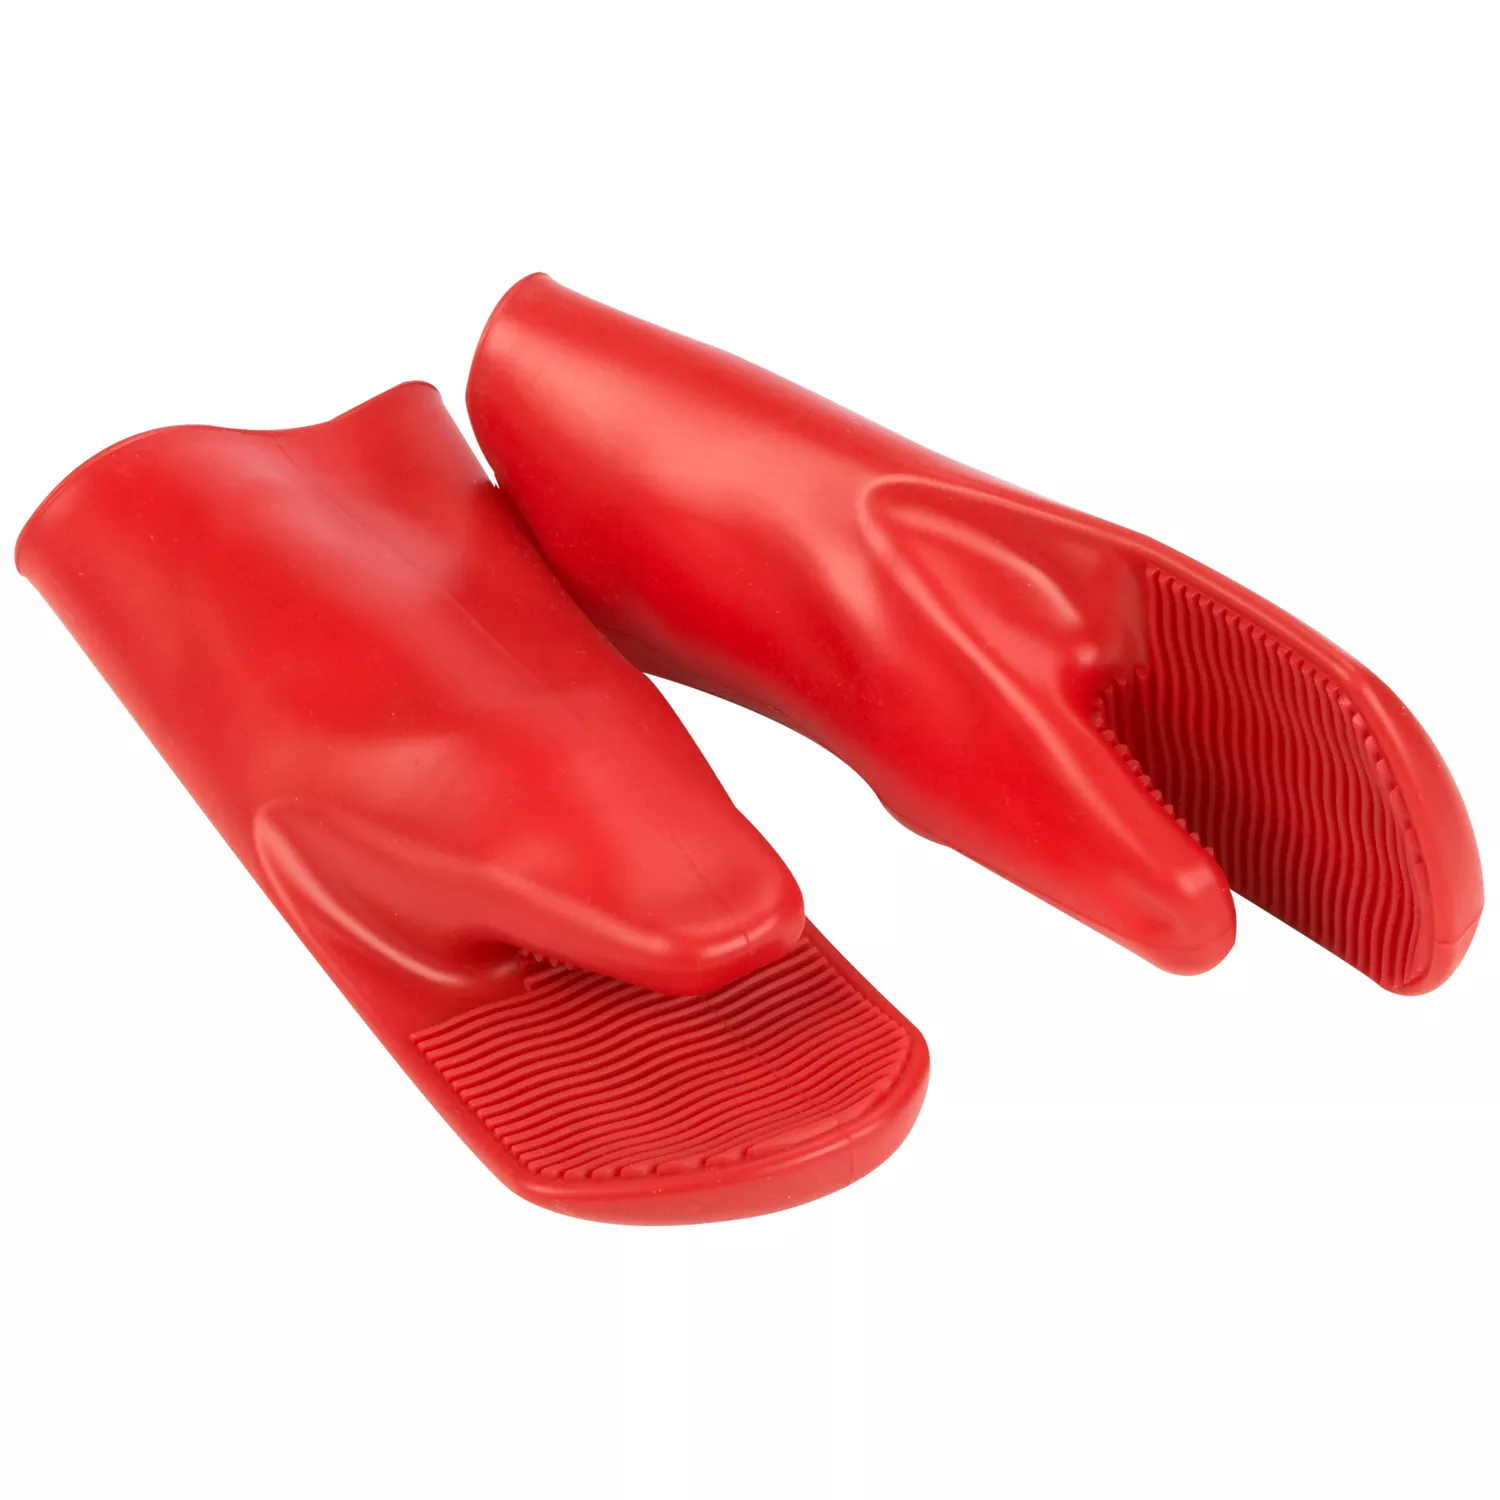 Red Silicone Canning Mitts, Set of 2